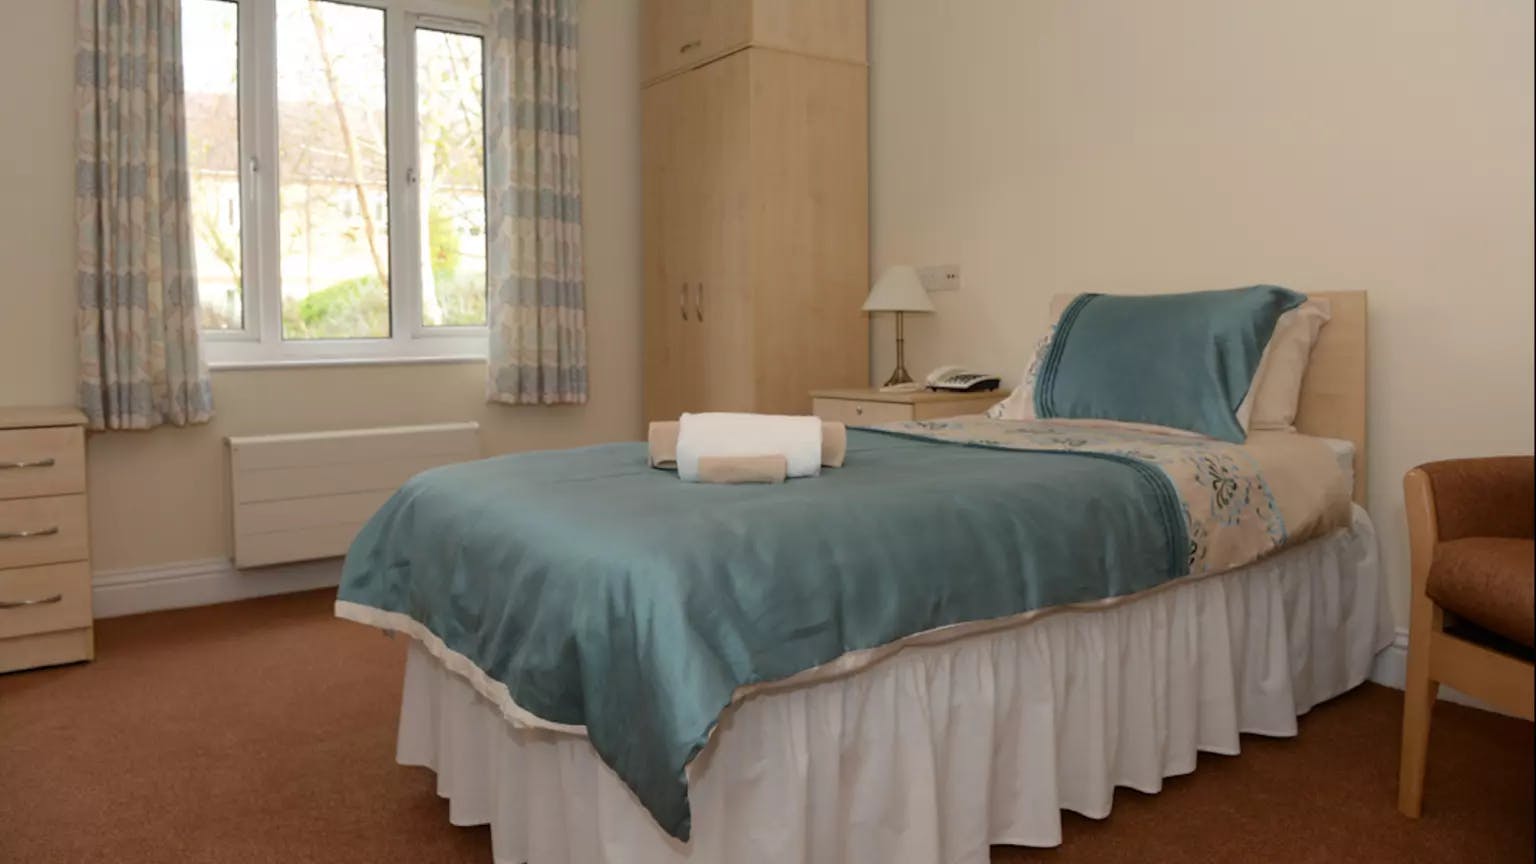 Bedroom of Mayfair Lodge care home in Watkins Rise, Hertfordshire